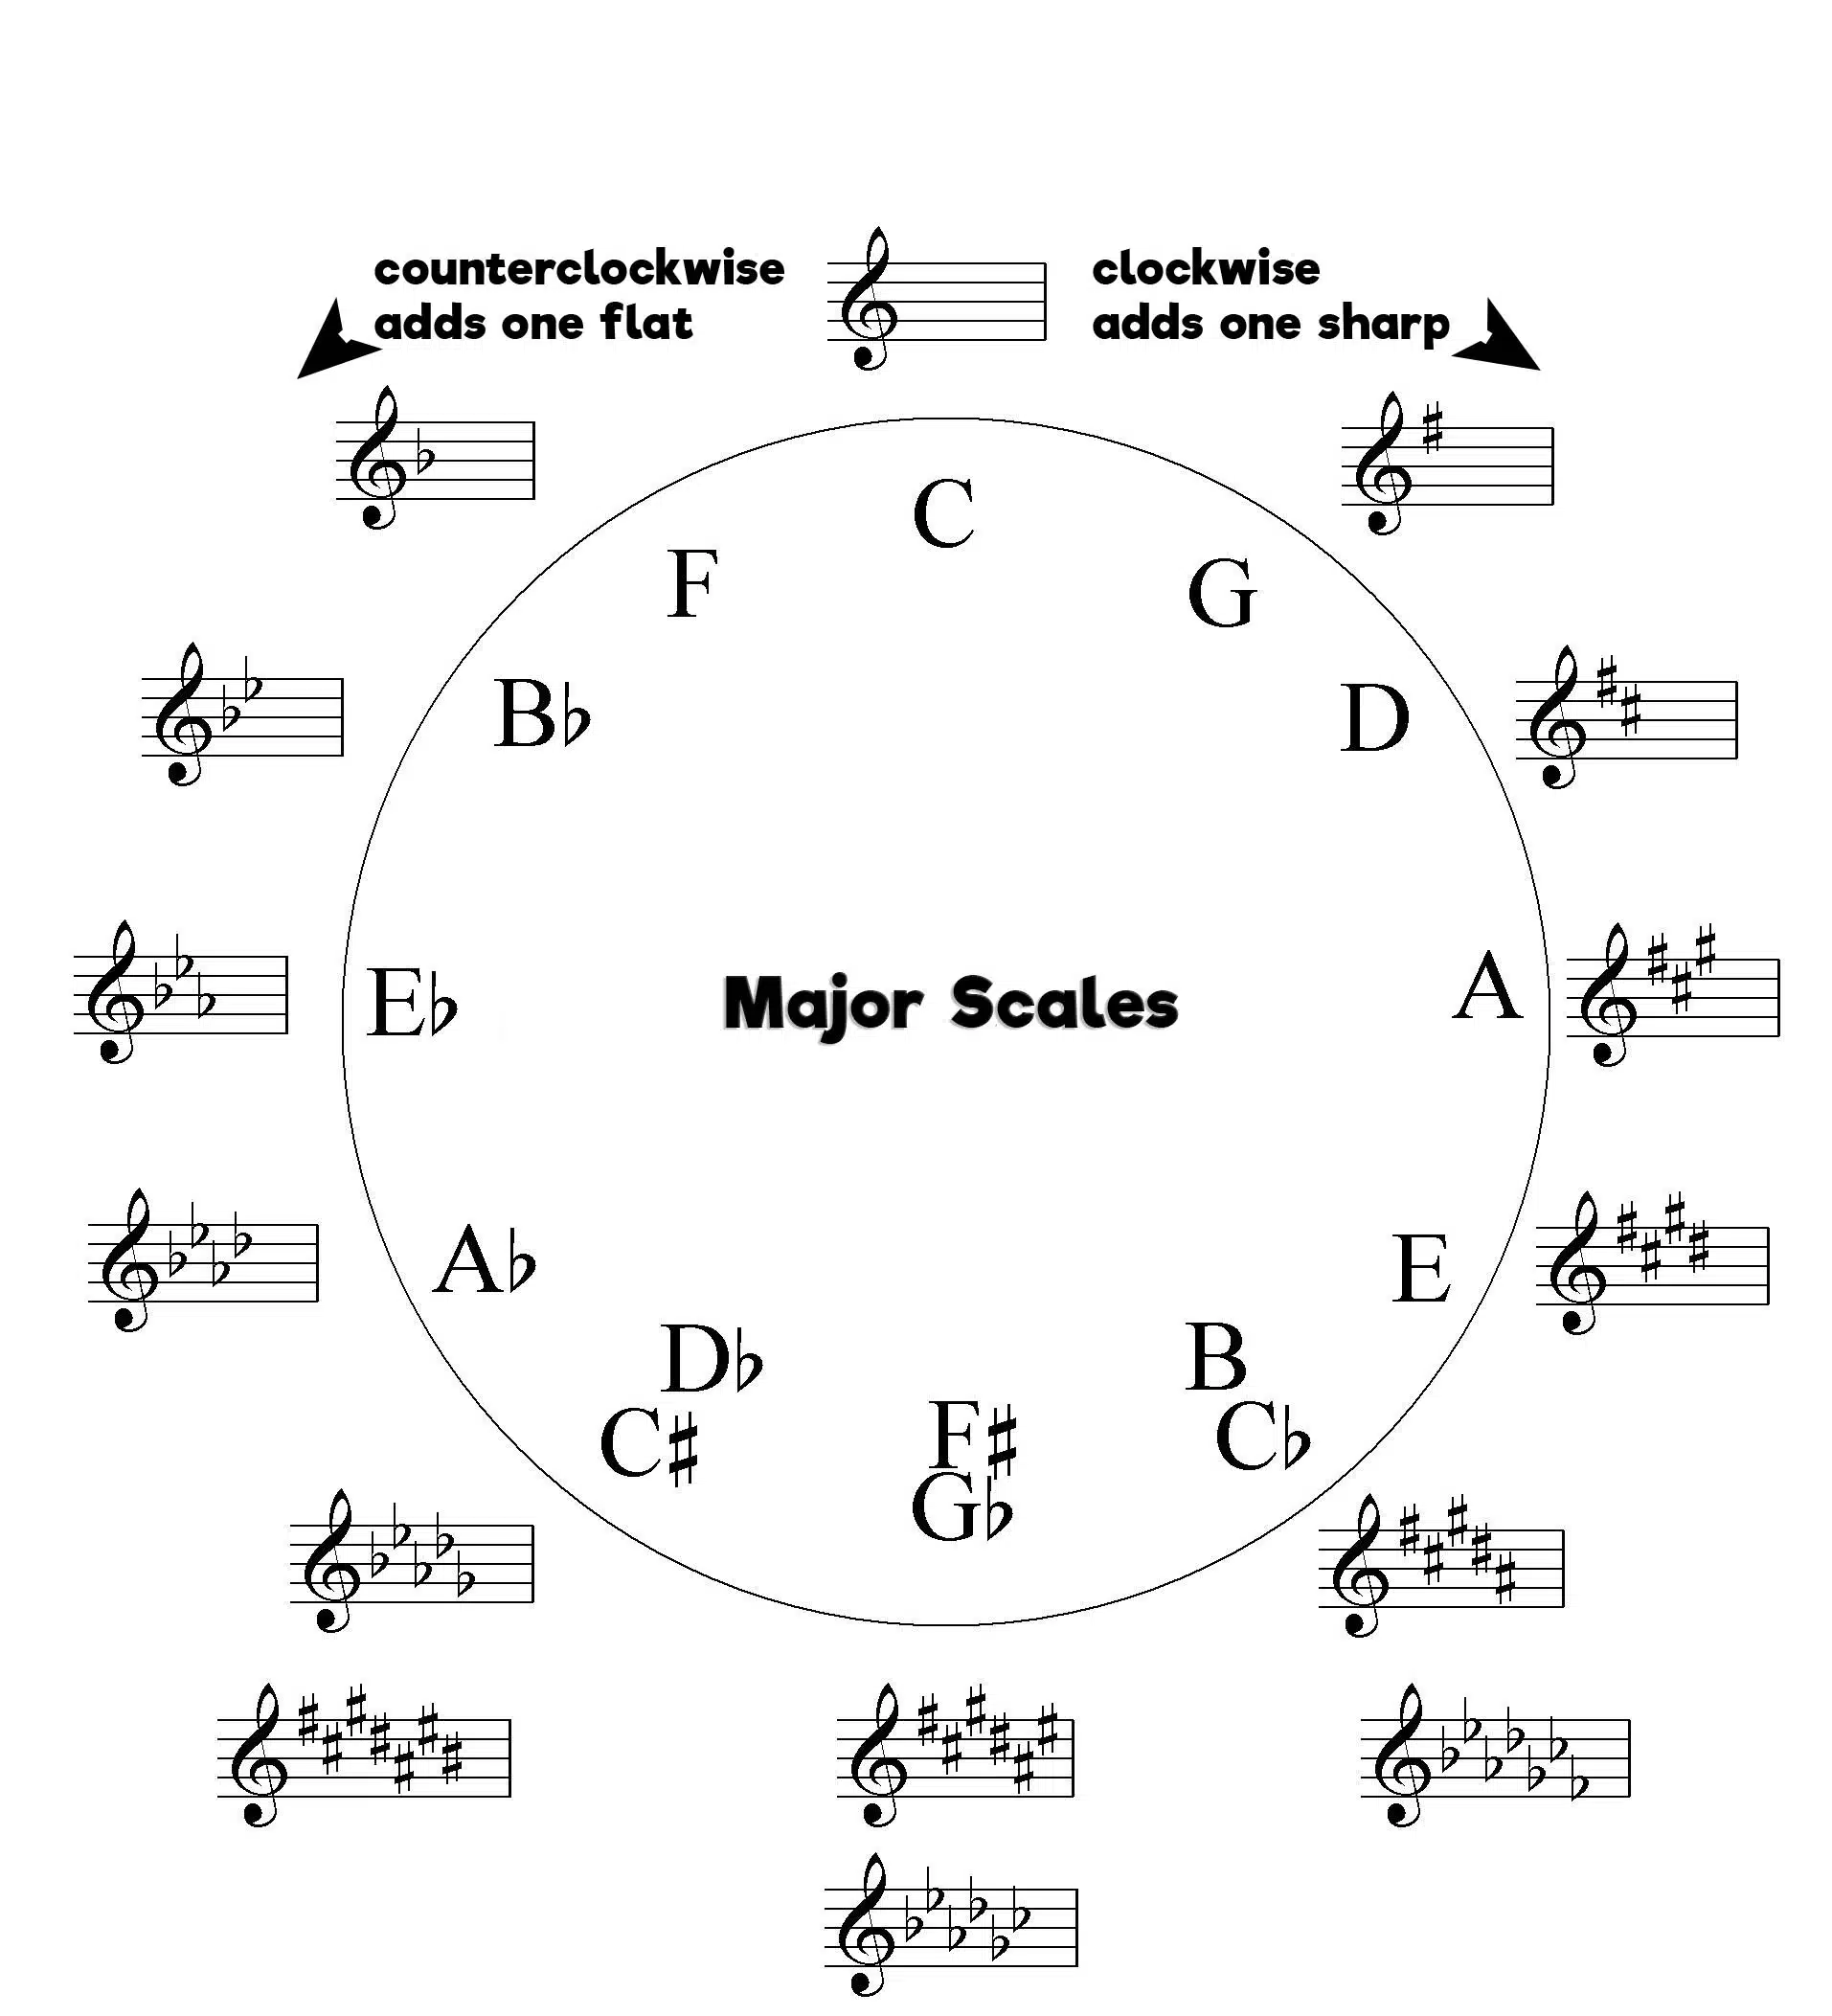 Sharps Circle Clockwise Counter clockwise - Circle of fifths - Unison Audio